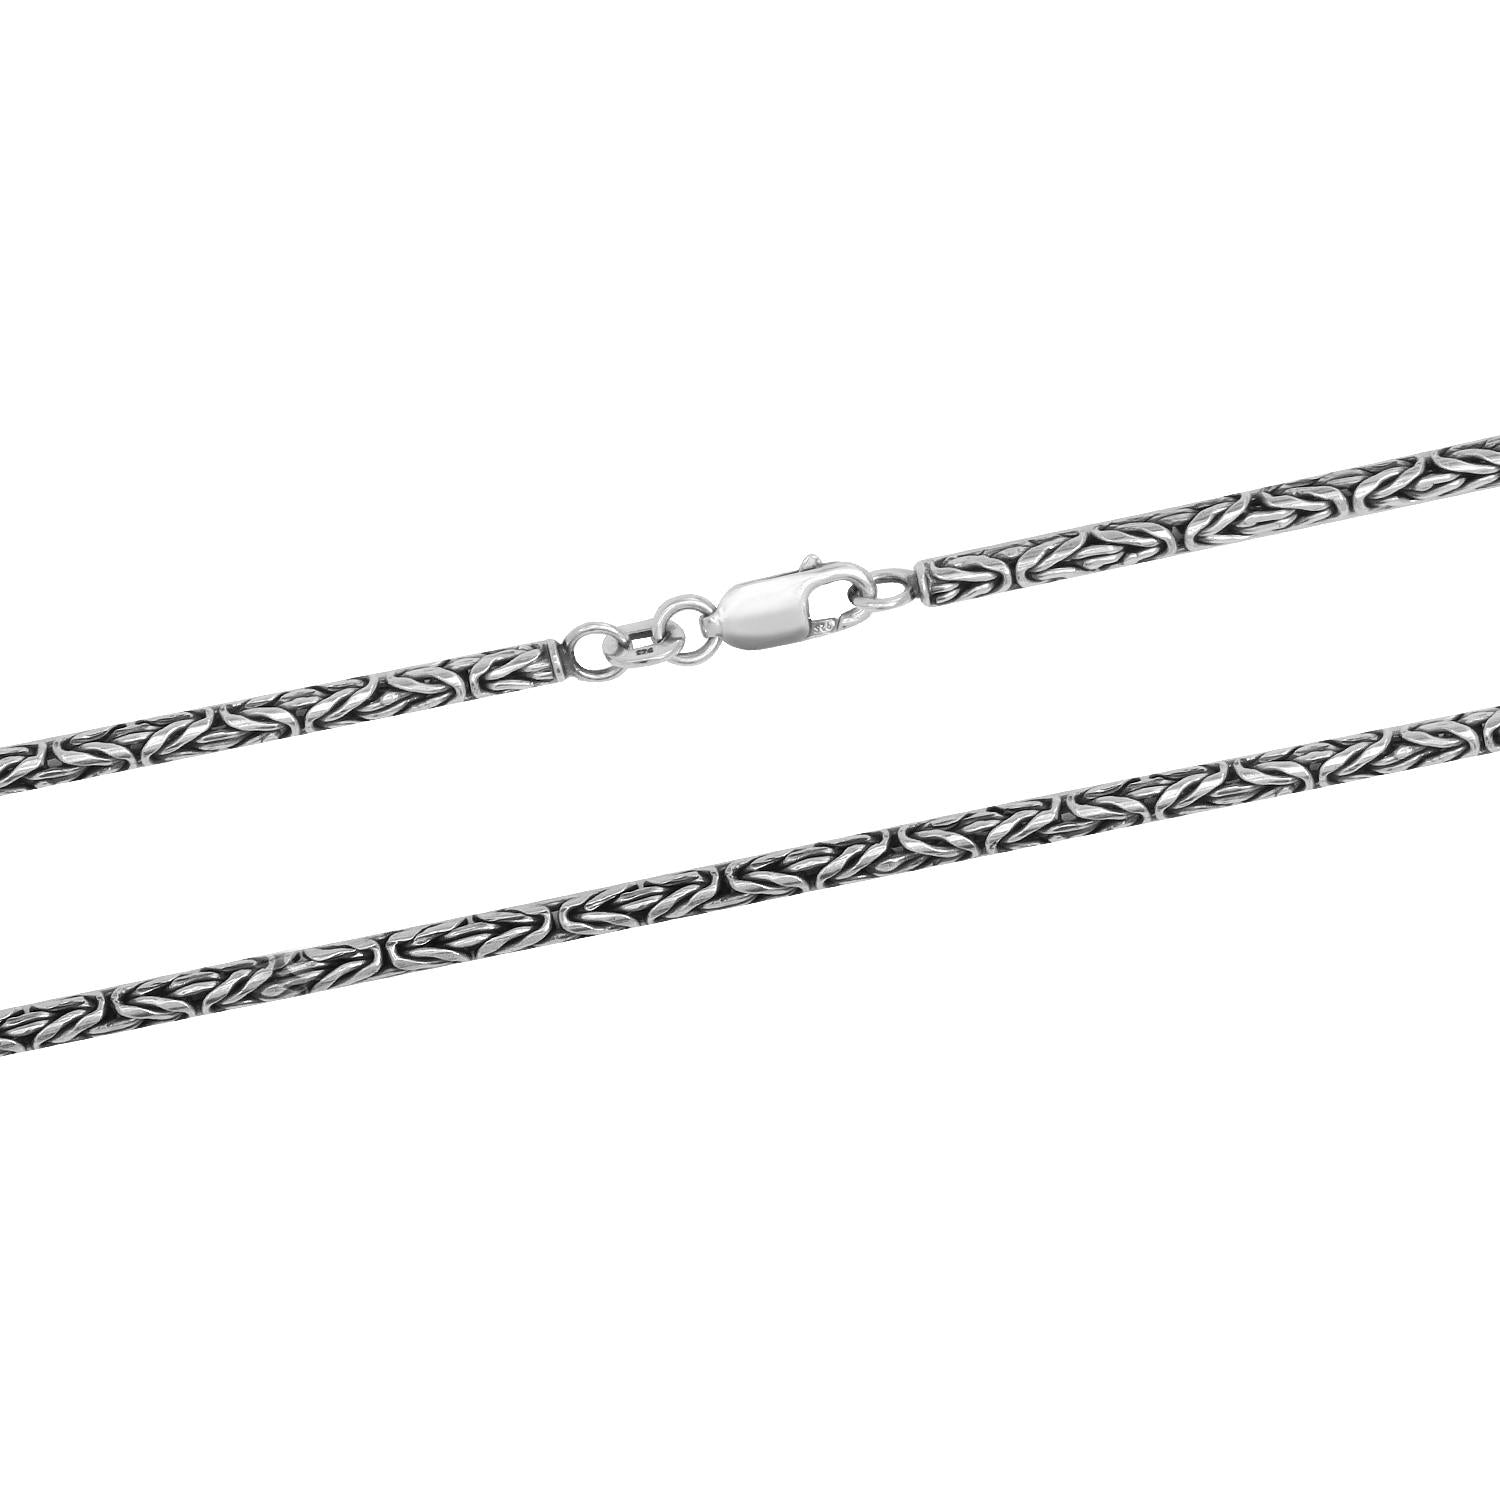 925 Sterling Silver Italian Round Handmade Classic Antique Byzantine Link Chain Necklace for Men Women  2.5 MM